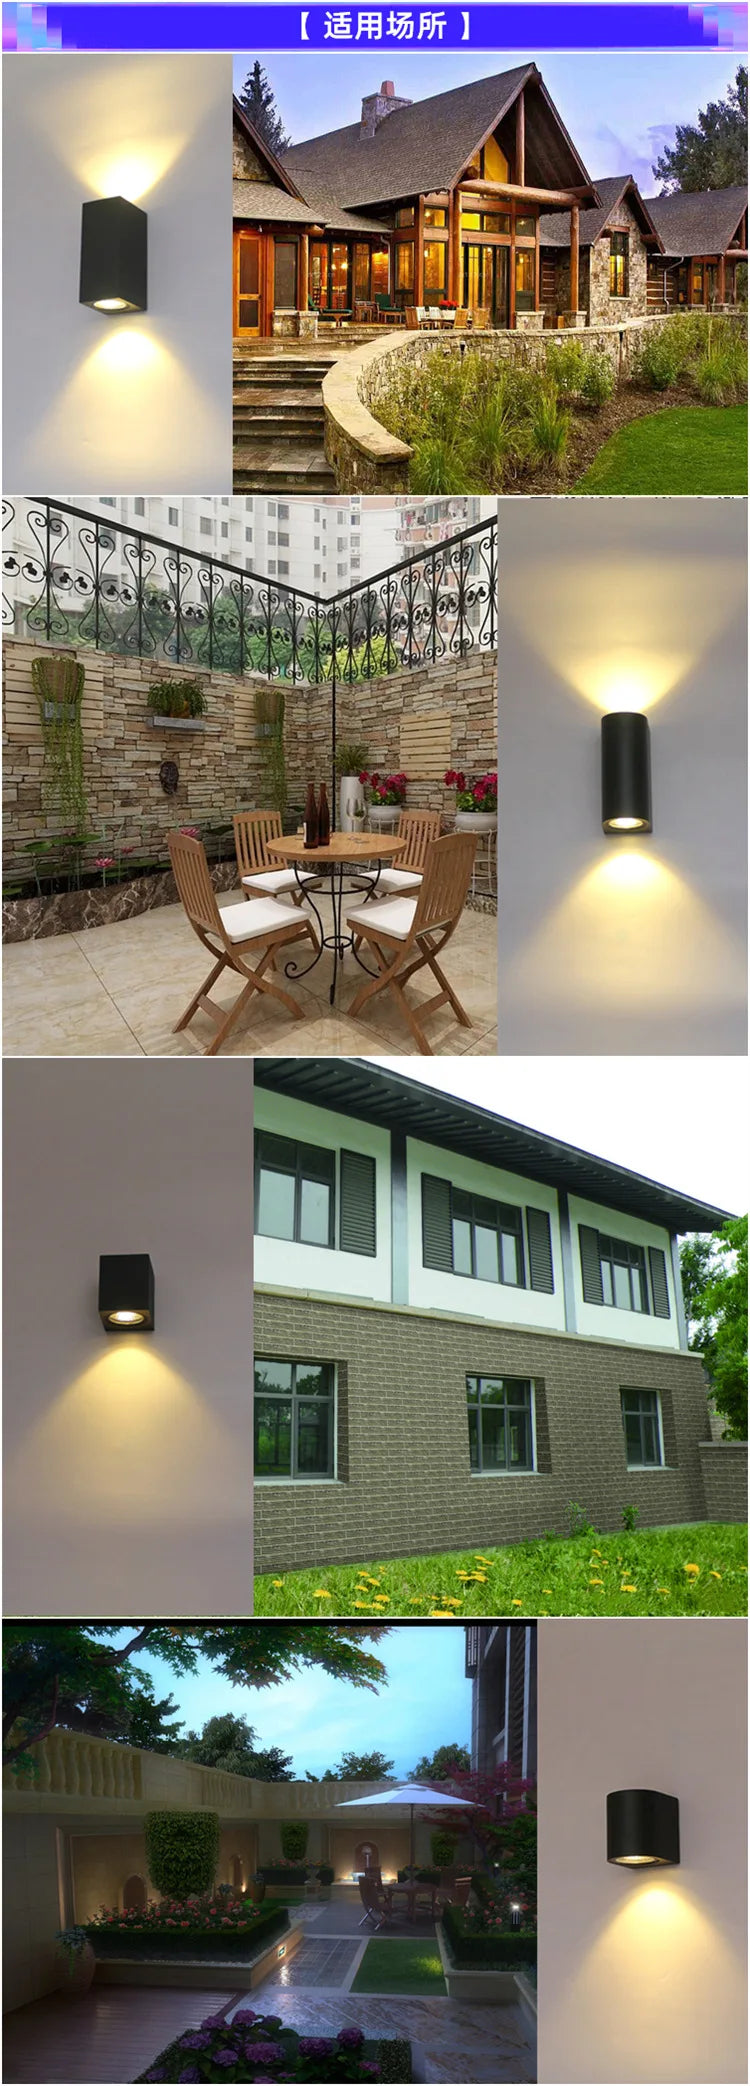 Seme - LED Wall Sconce Indoor Outdoor